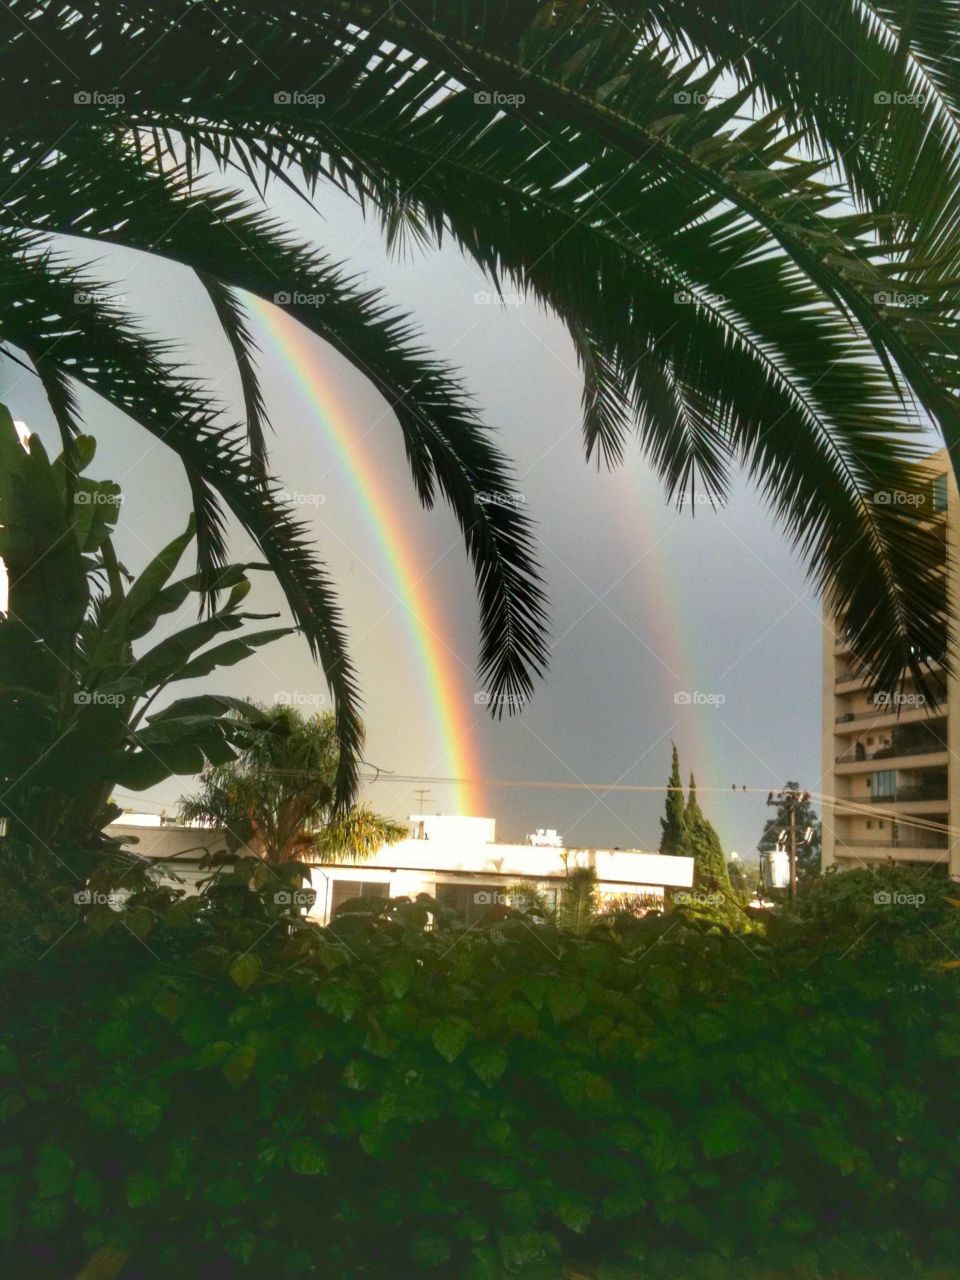 Double Rainbow Over WeHo - after a storm washes over the  city, rainbows add a dash of color to the dark sky framed by green palm trees. 